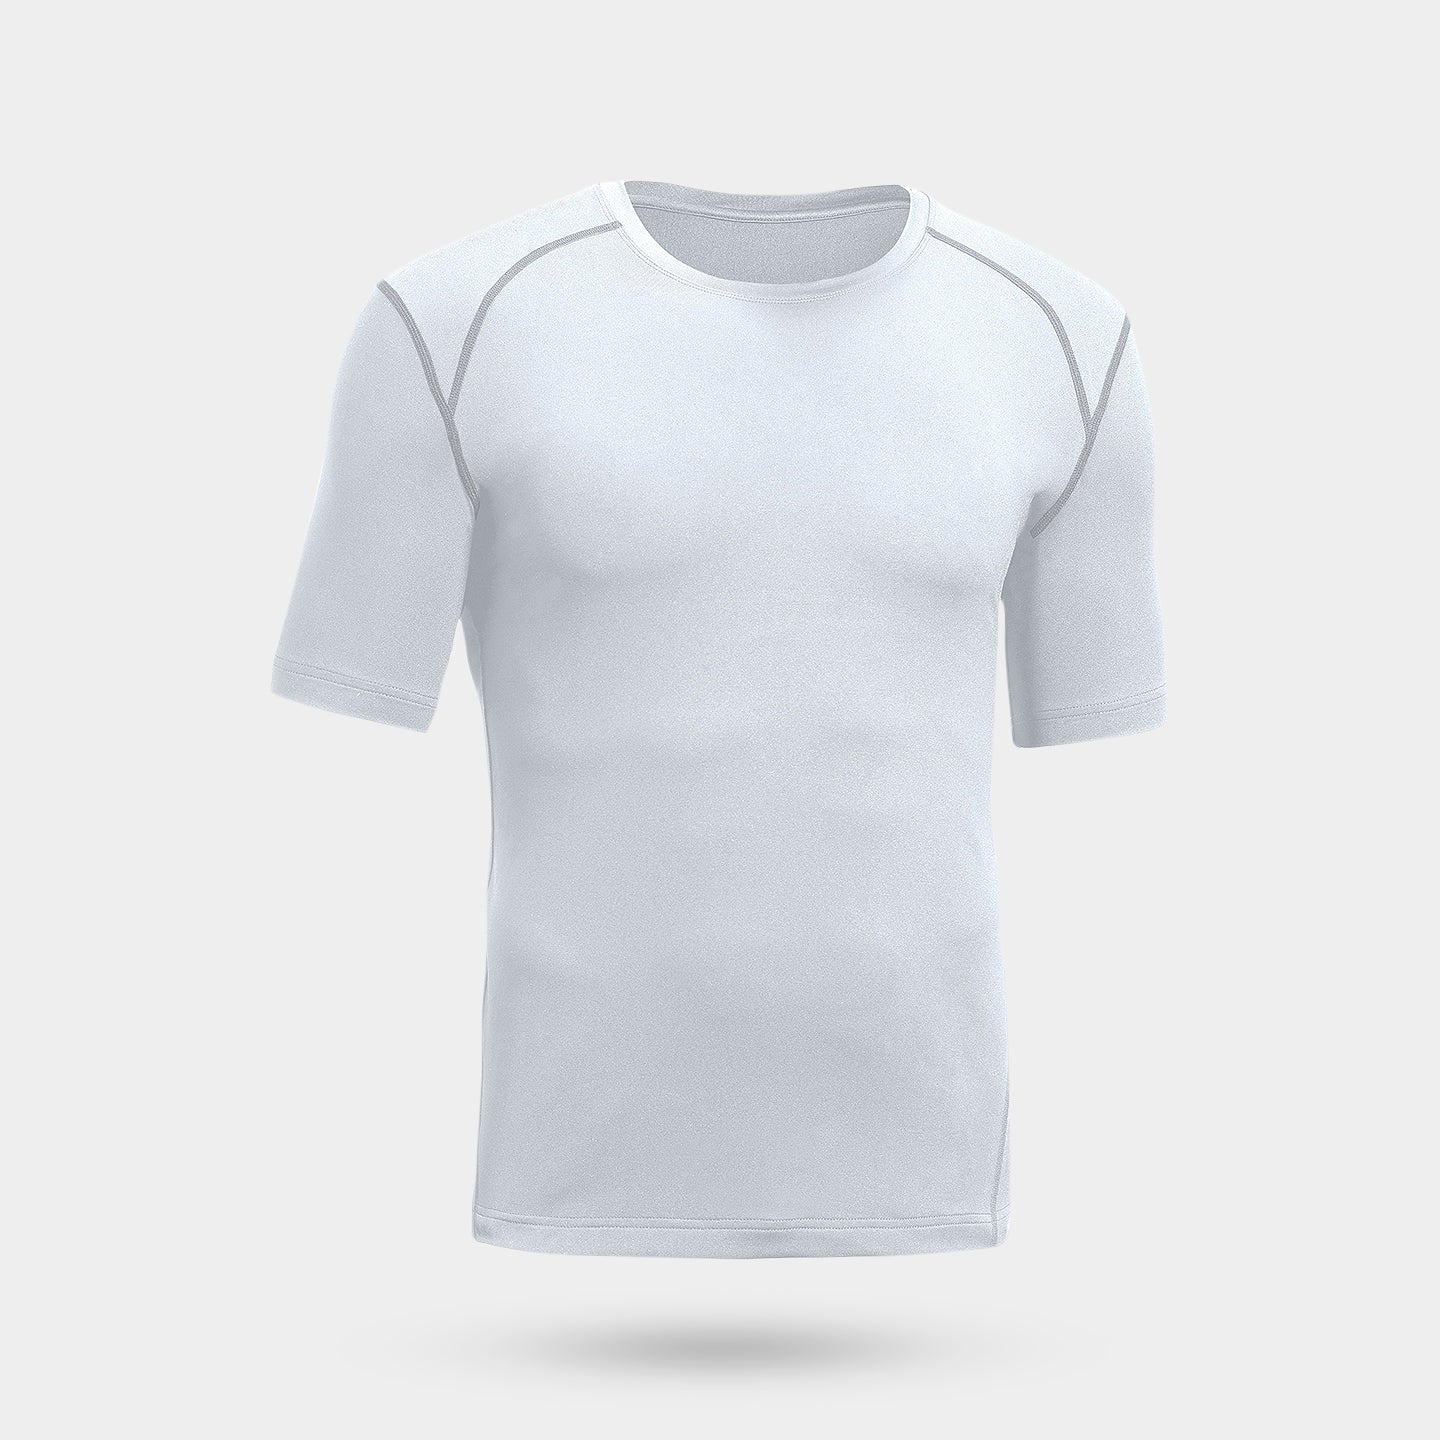 Expert Brand Men's Airstretch MVP Base Layer Performance Compression T-Shirt, S, White A1